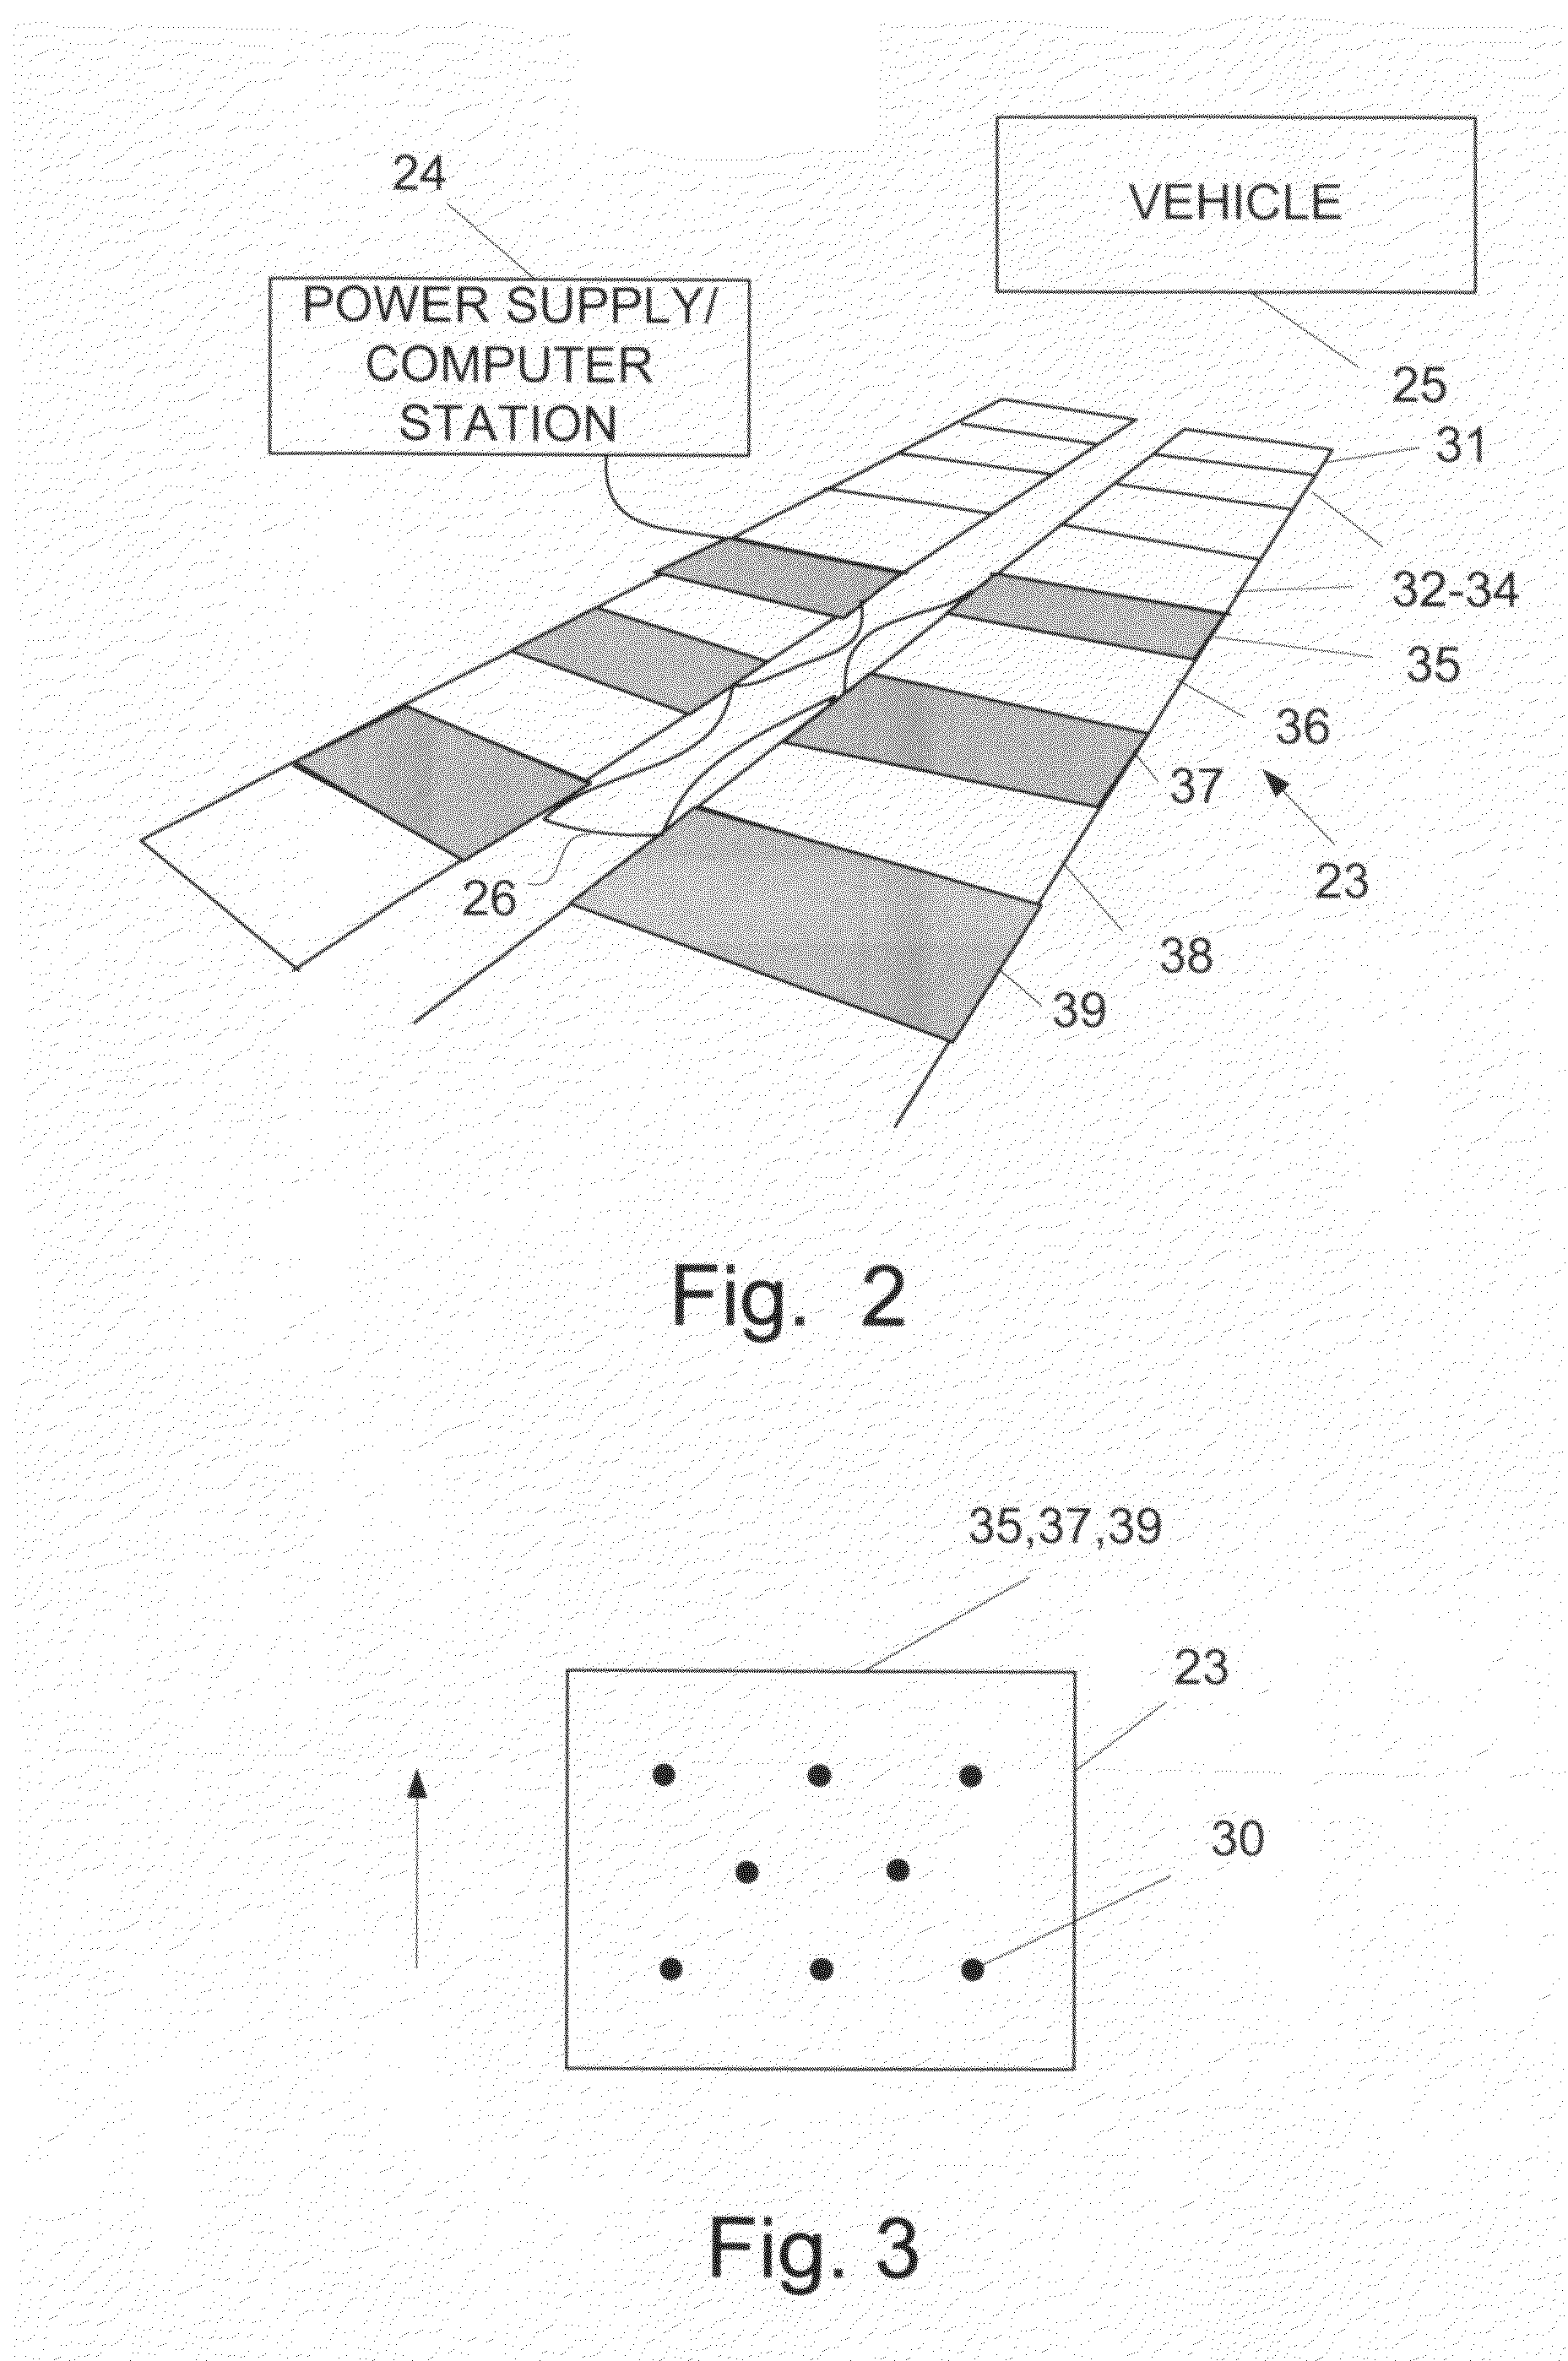 Method and system for reducing errors in vehicle weighing systems